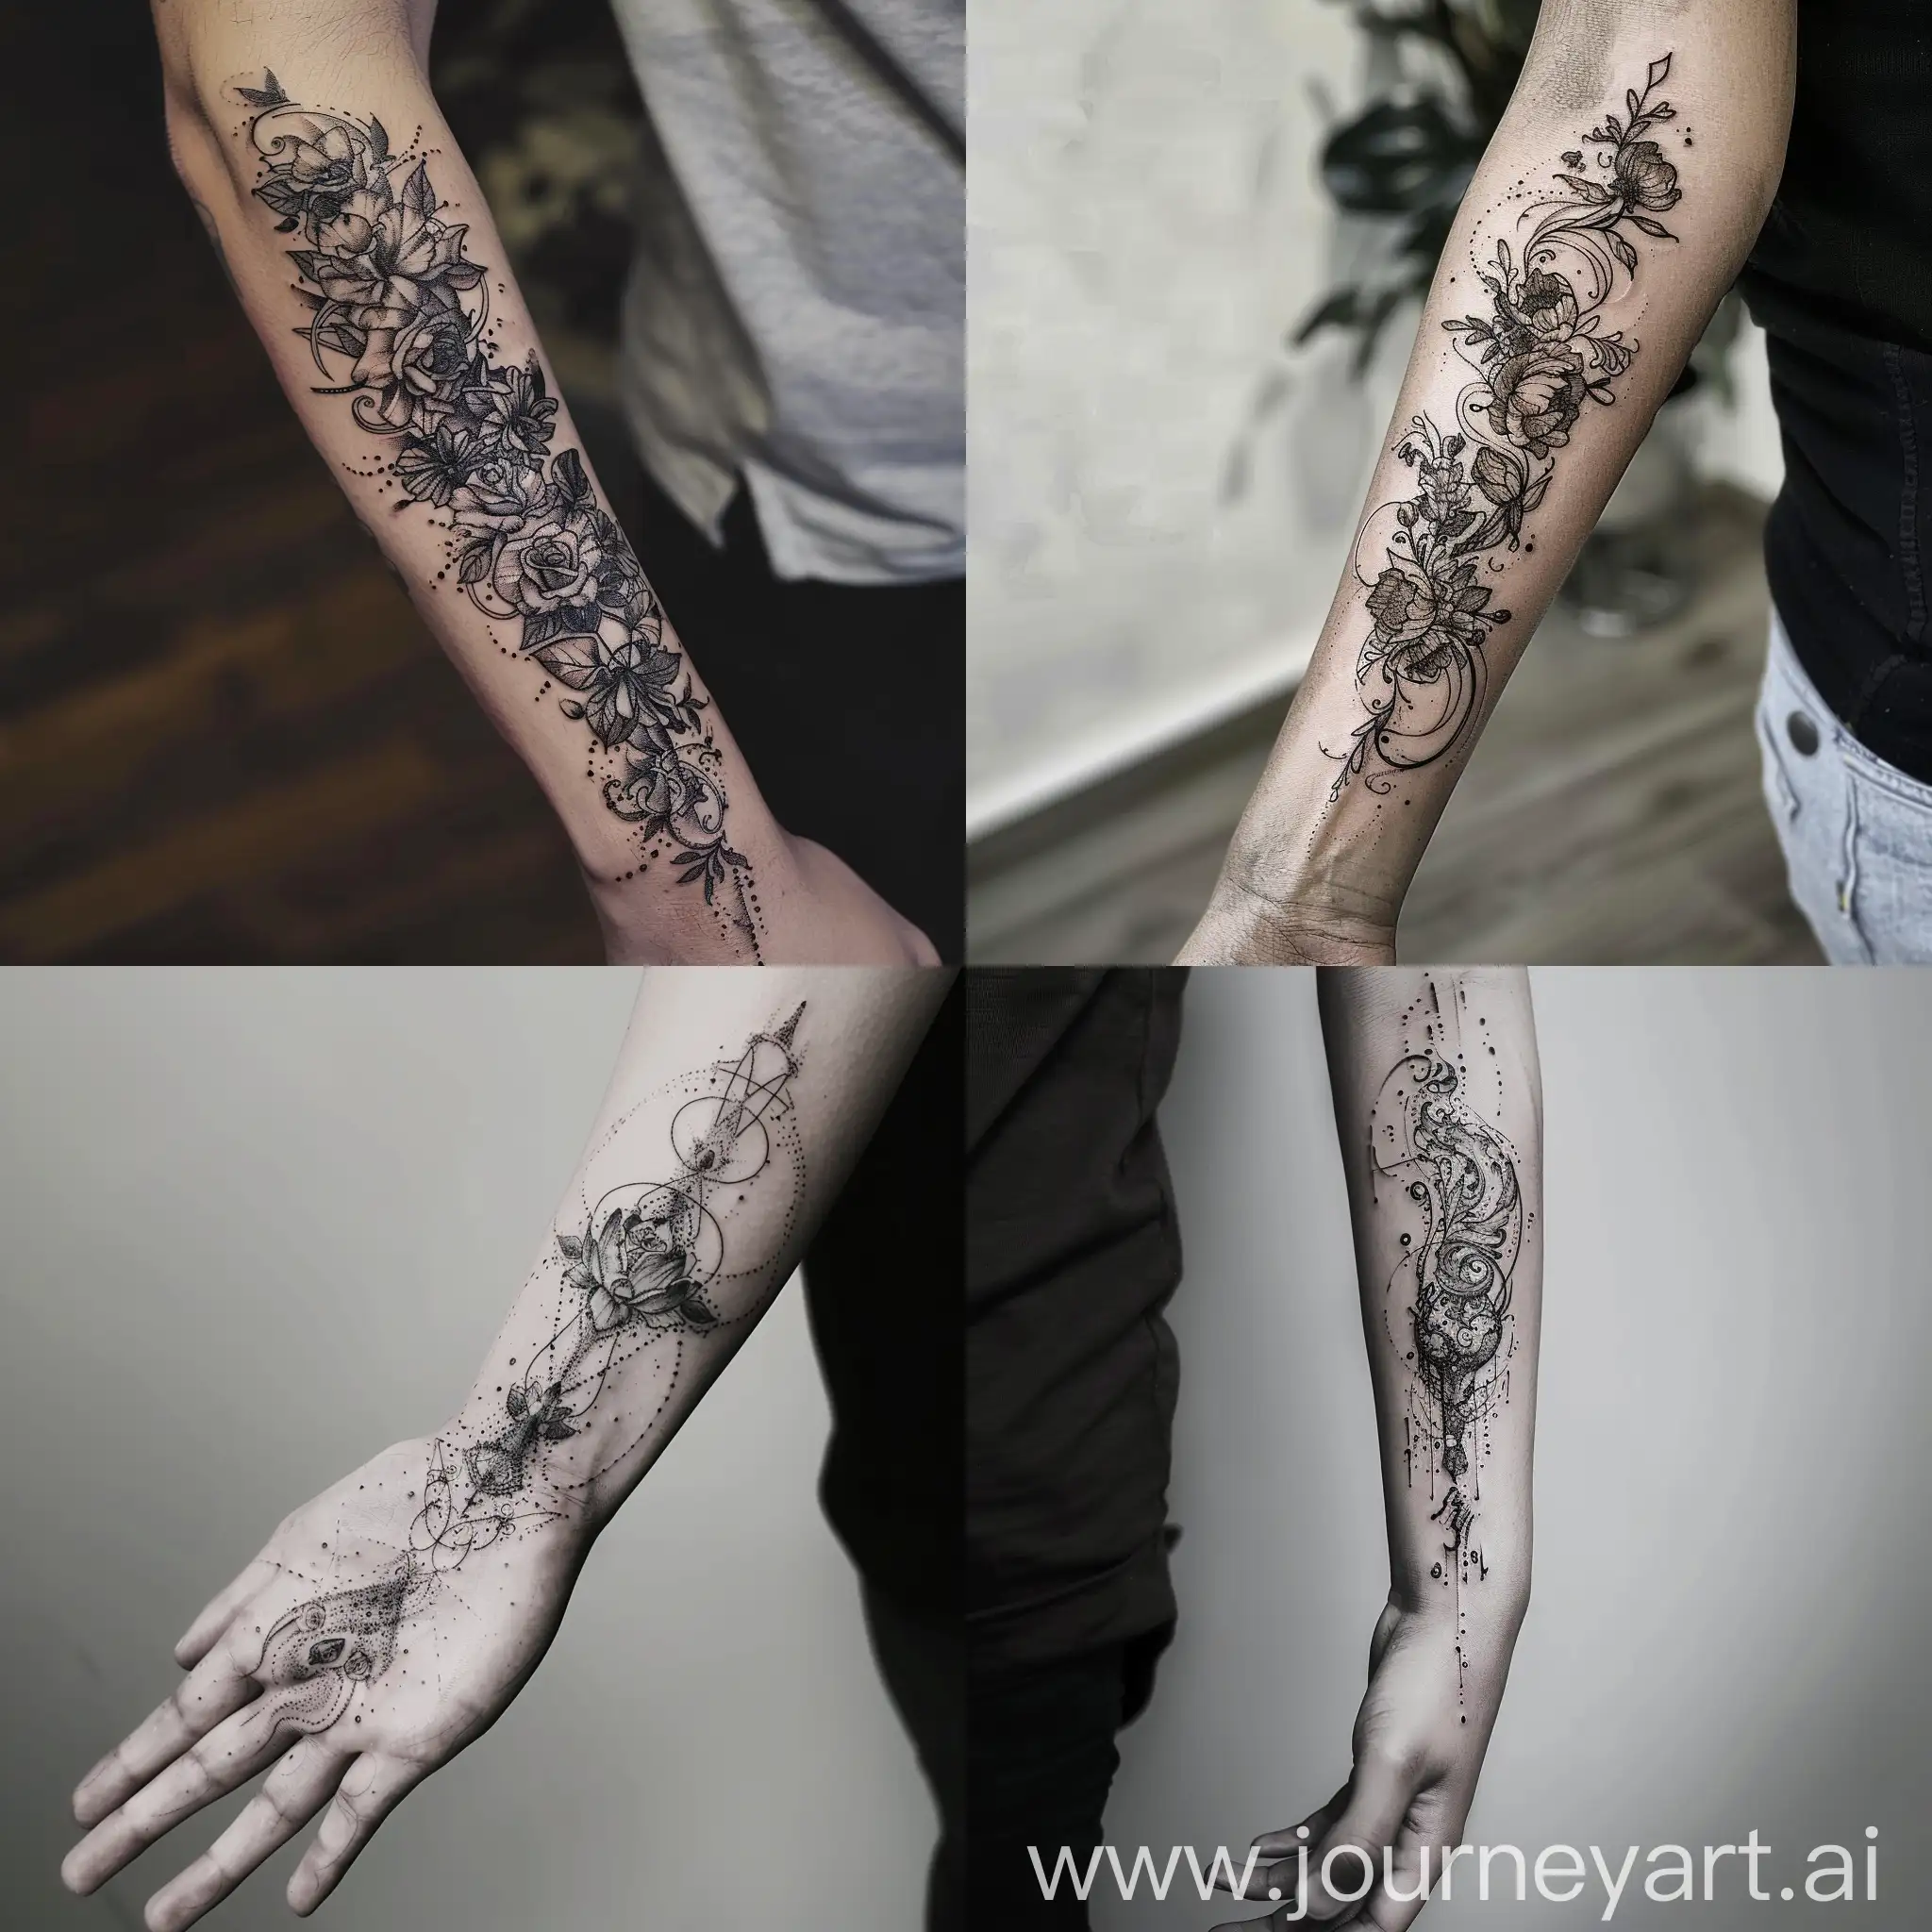 Forearm with tattoo fading away and transforming into another tattoo.